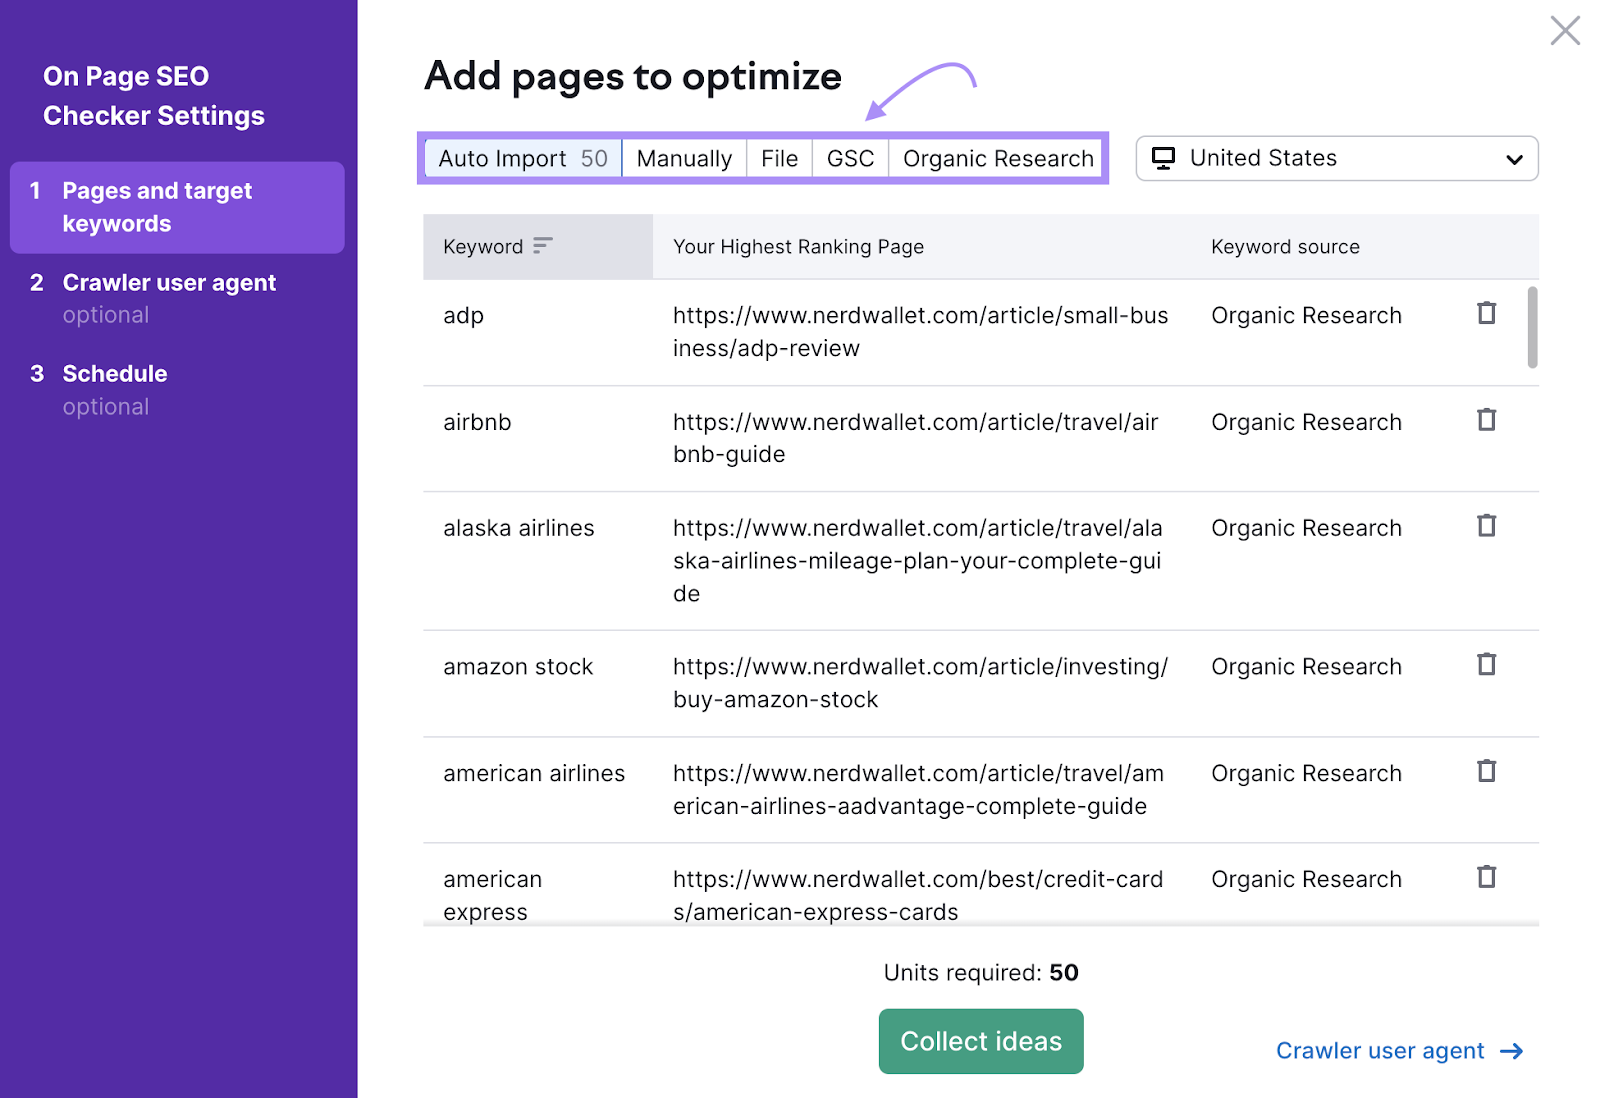 "Add pages to optimize" window in On-Page SEO Checker Settings